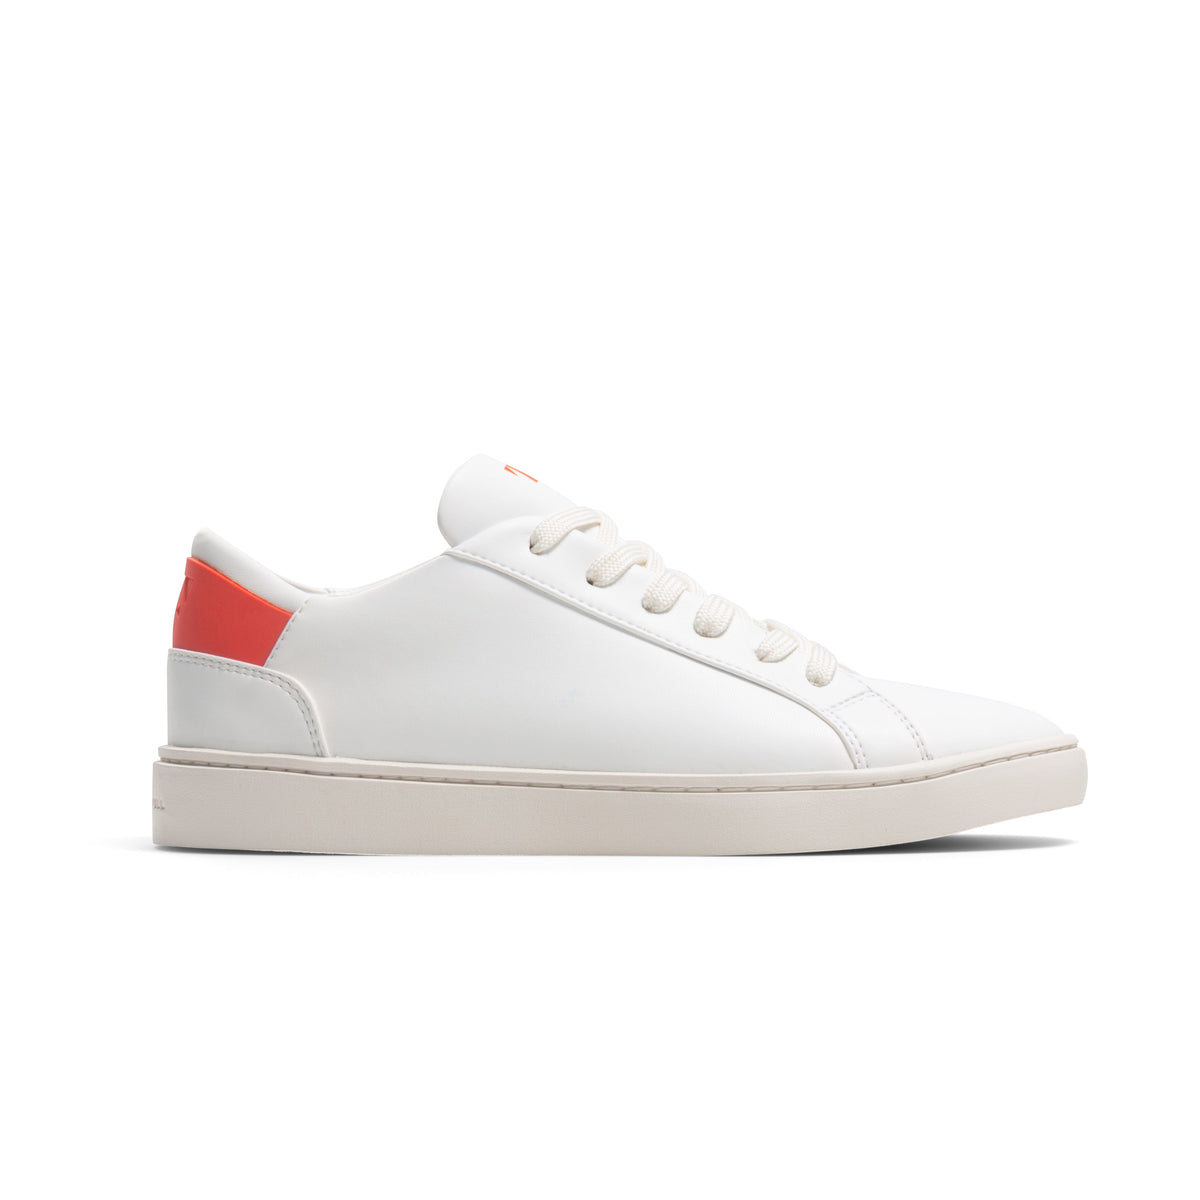 white sustainable sneaker with red upper back heel detail